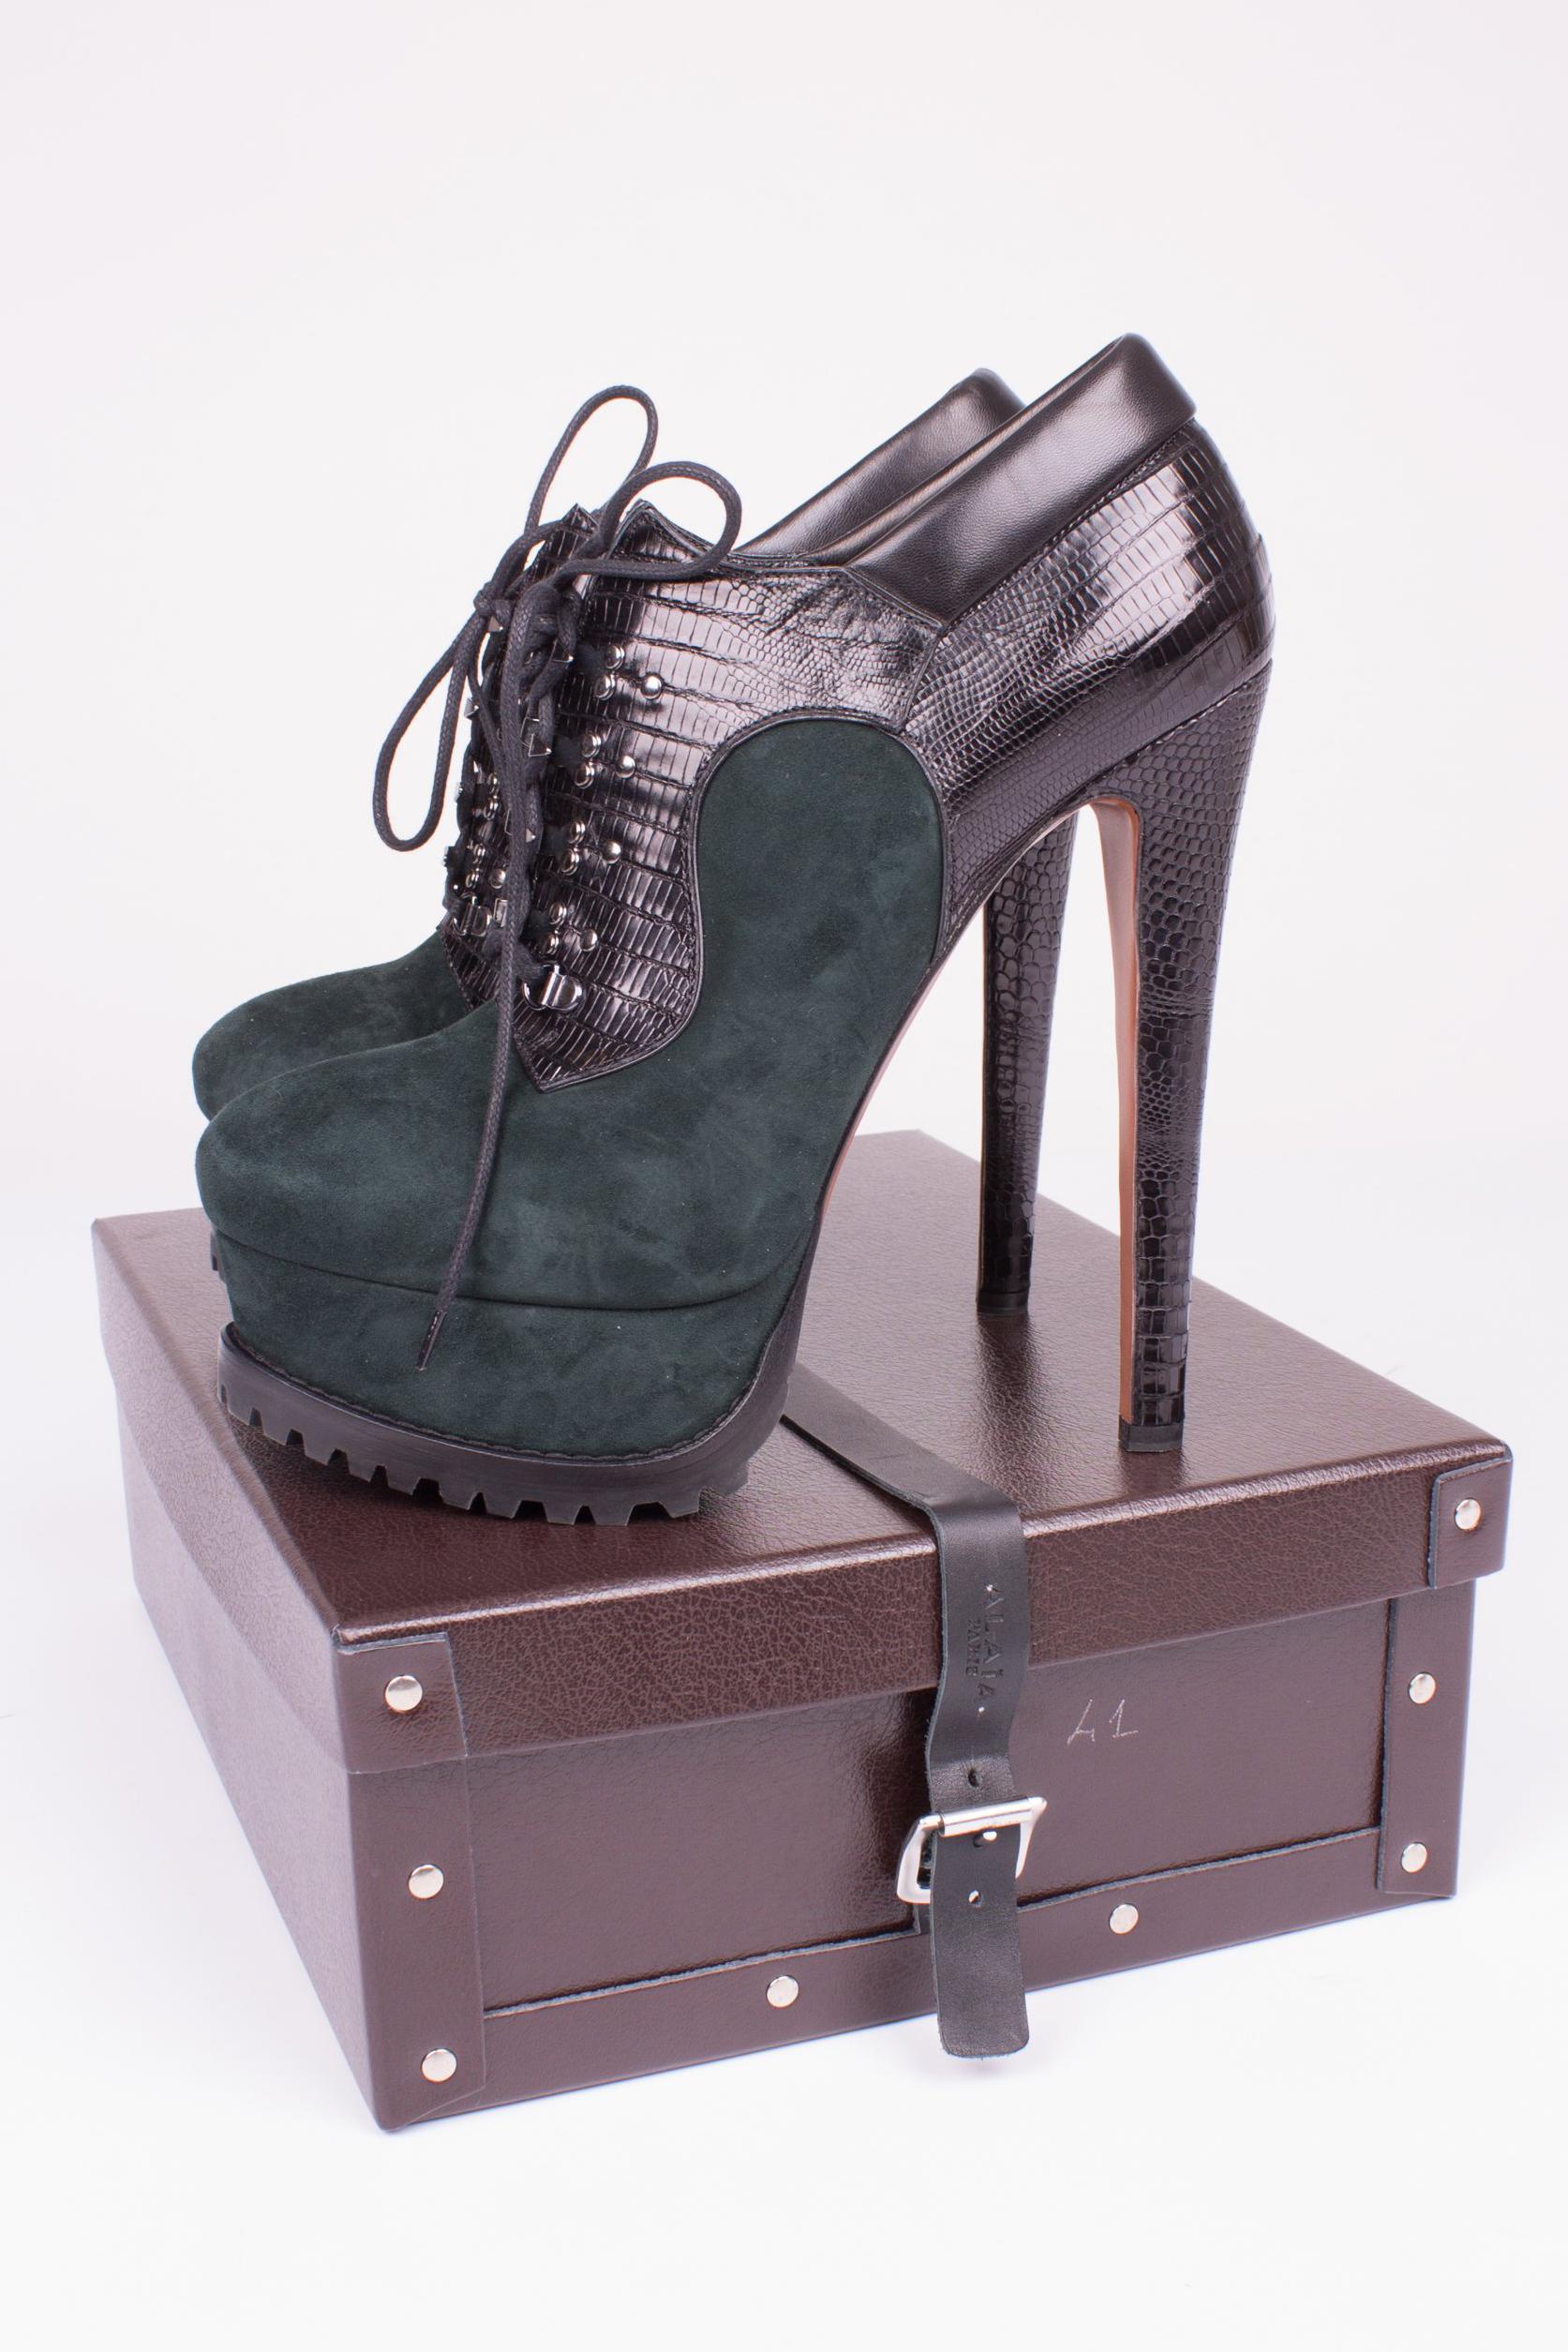 Sky high lace-up shoe by Alaïa in black croco-print leather and dark green suede.

The heel measures as much as 17 centimeters and the platform 4,5 centimeters. At the front a black lace. Interior fully lined with black leather, a nude colored